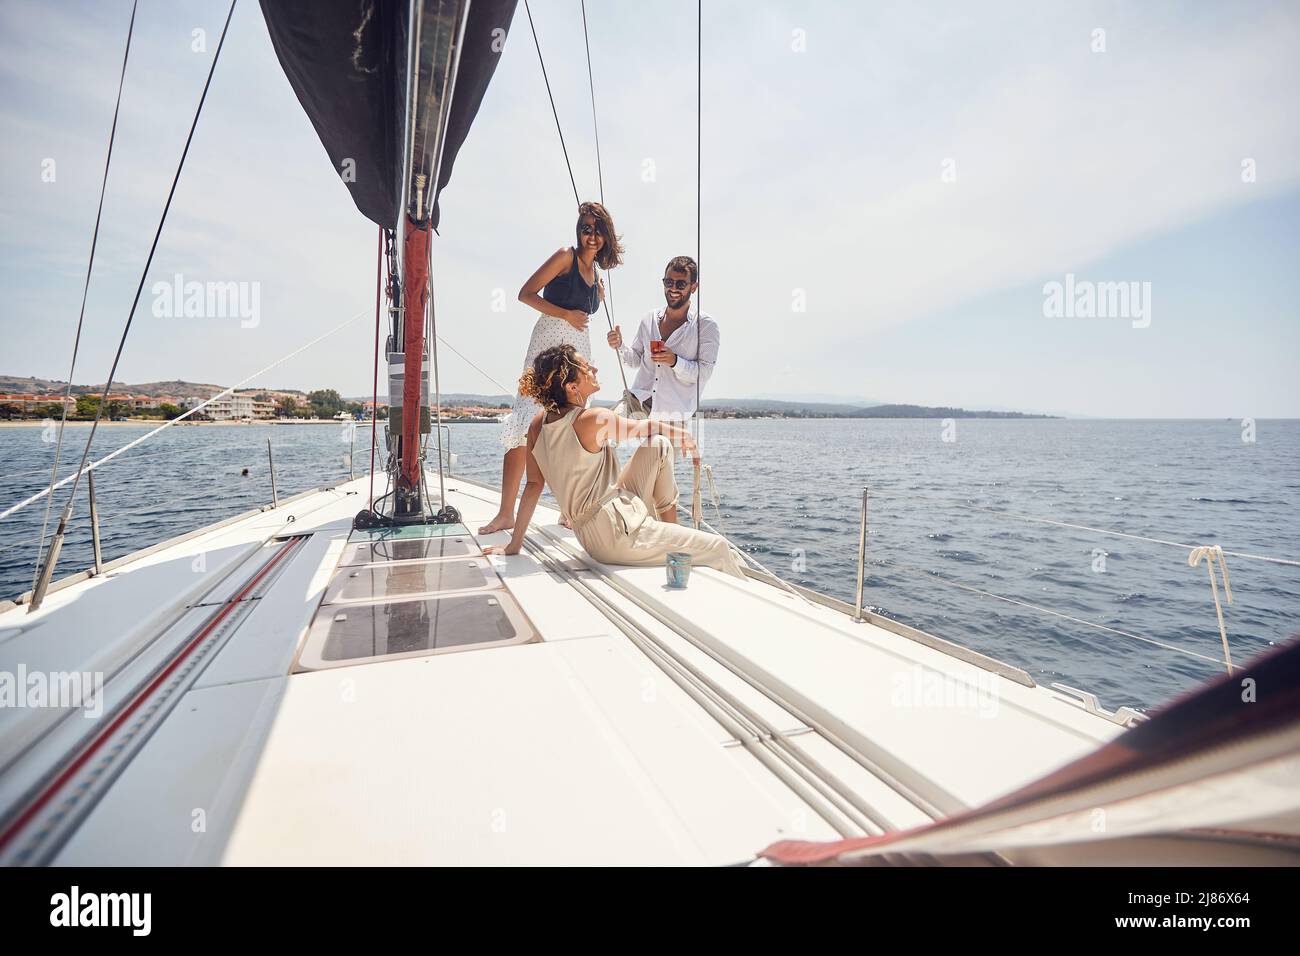 A group of young handsome models is enjoying the sun and the wind while is posing for a photo on the deck of the yacht on a beautiful summer day on th Stock Photo